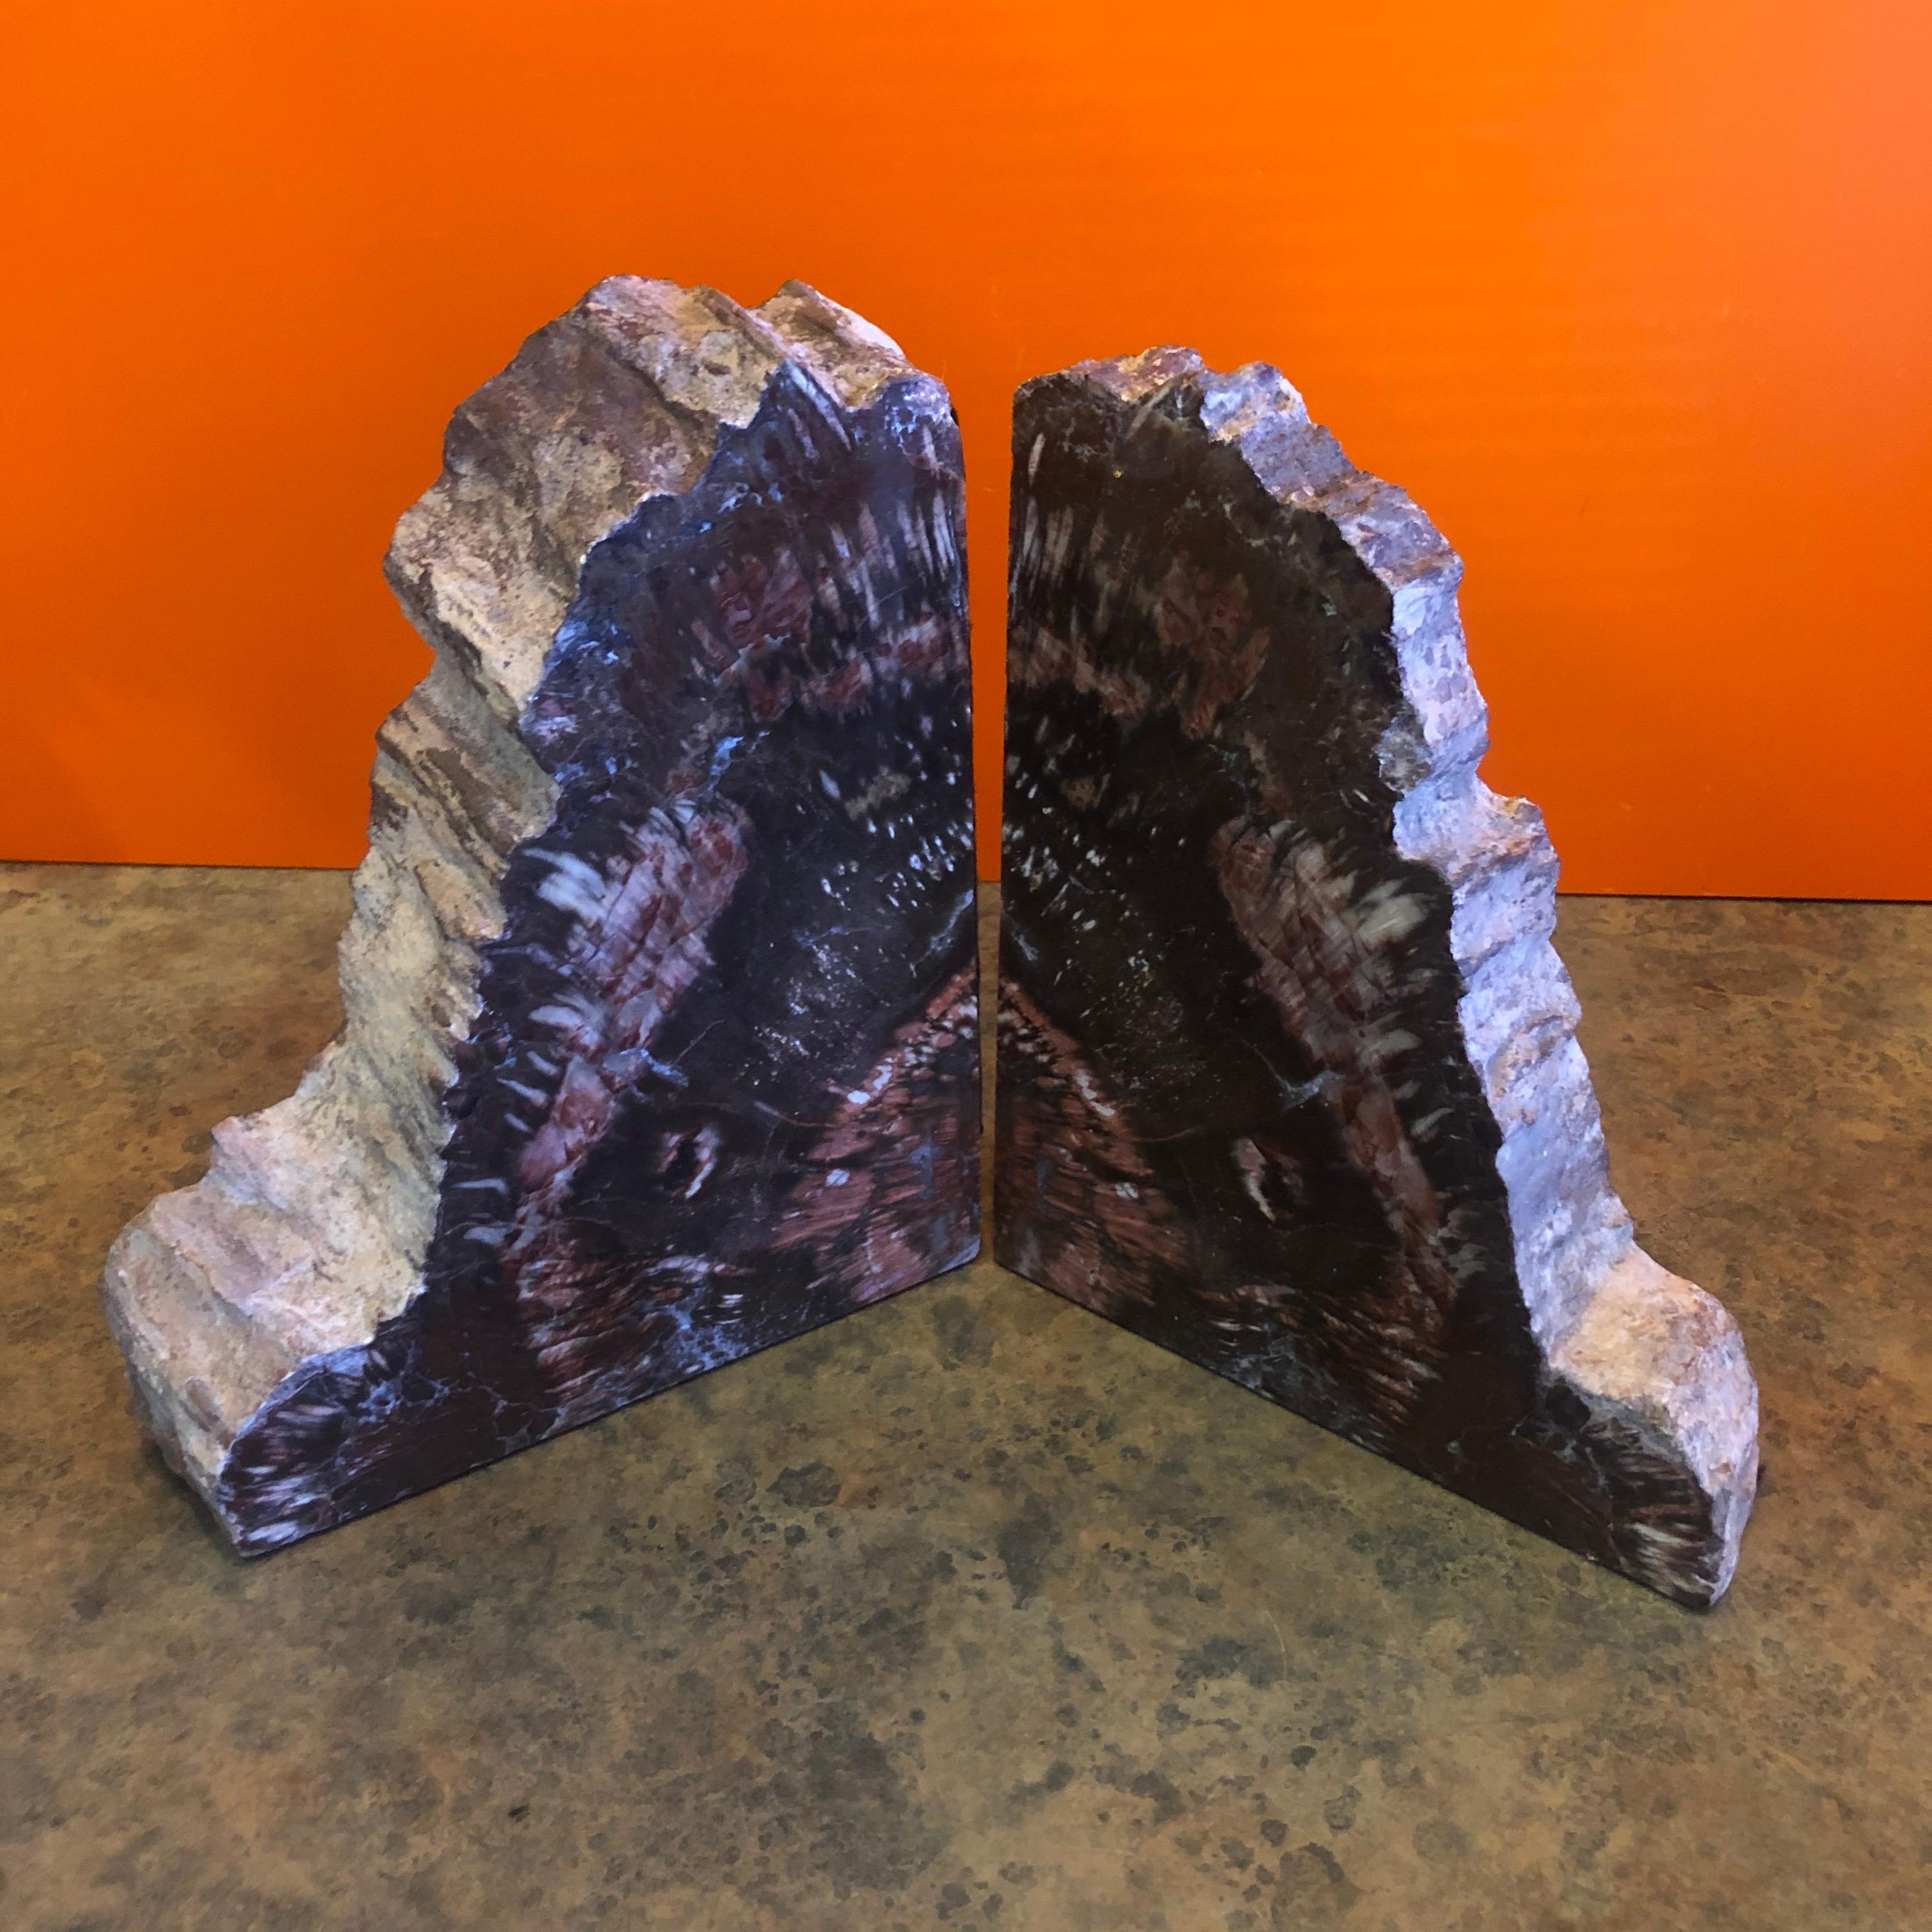 An impressive pair of petrified wood bookends, circa pre-history. Brightly colored tan and brown tones with naturally formed patterns caused by fossilization over millions of years. Finished with a highly polished surface, the exterior edges